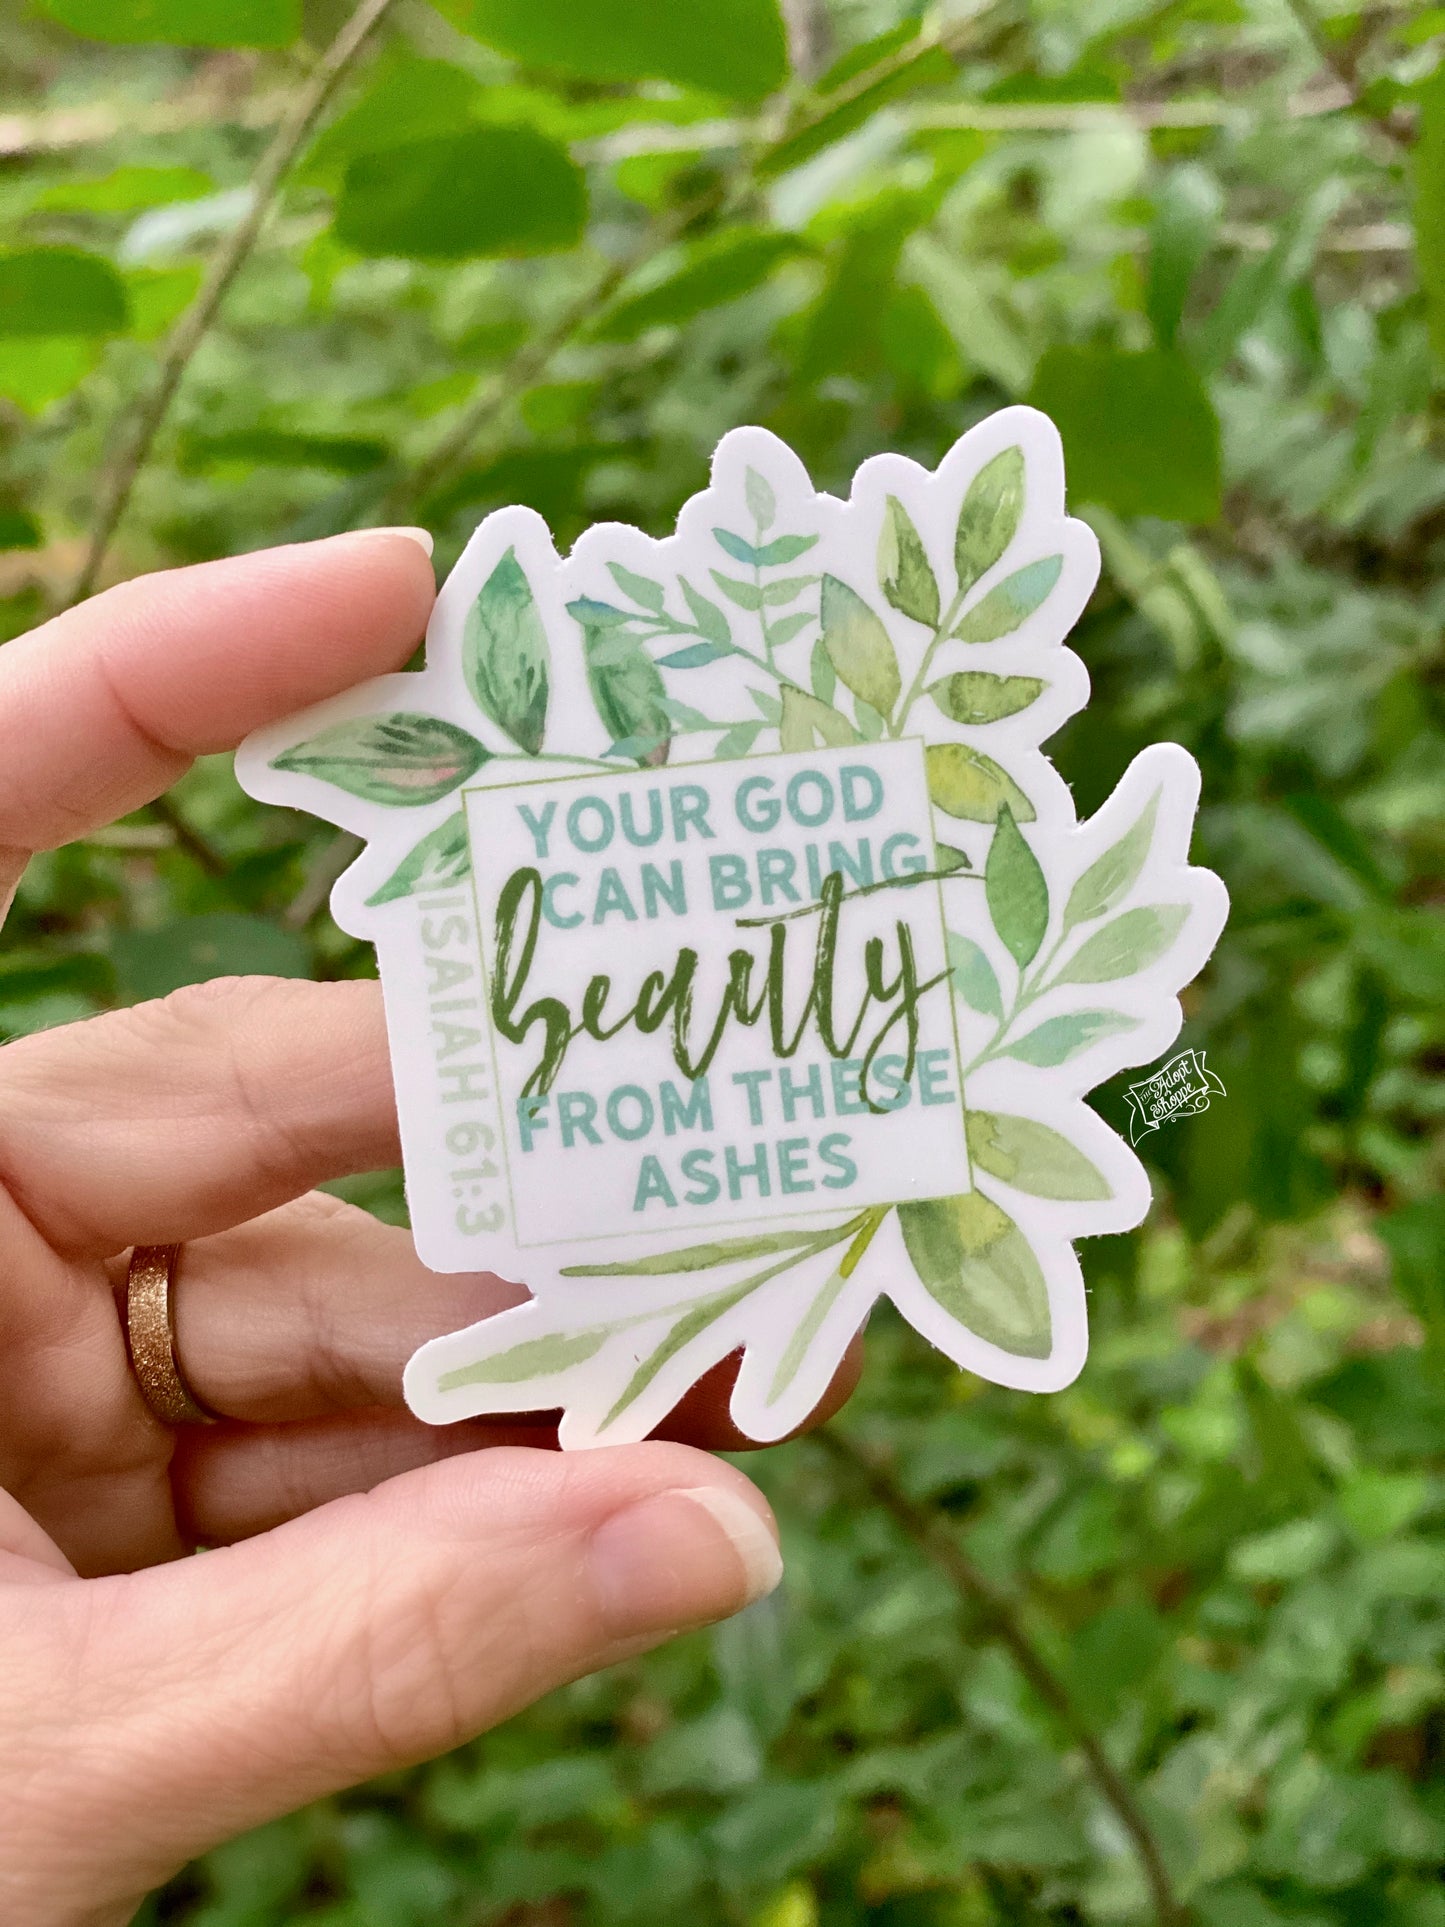 your God can bring beauty from these ashes (Isaiah 61:3) vinyl sticker